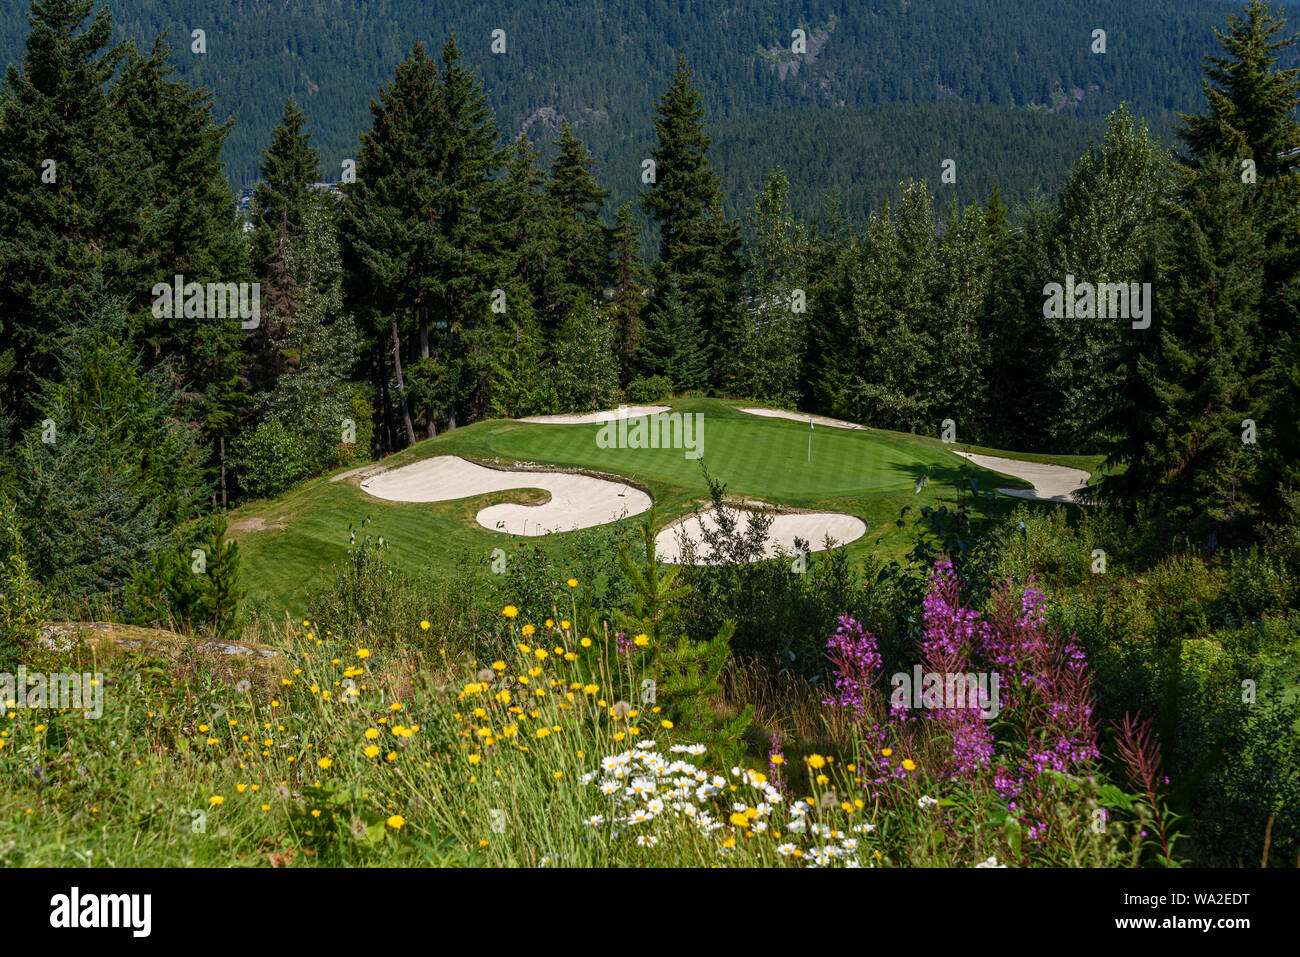 WHISTLER, BC/CANADA – AUGUST 3, 2019: Fairmont Chateau Whistler Golf Club,  sunny day on tee box looking down at a green surrounded by sand traps Stock  Photo - Alamy